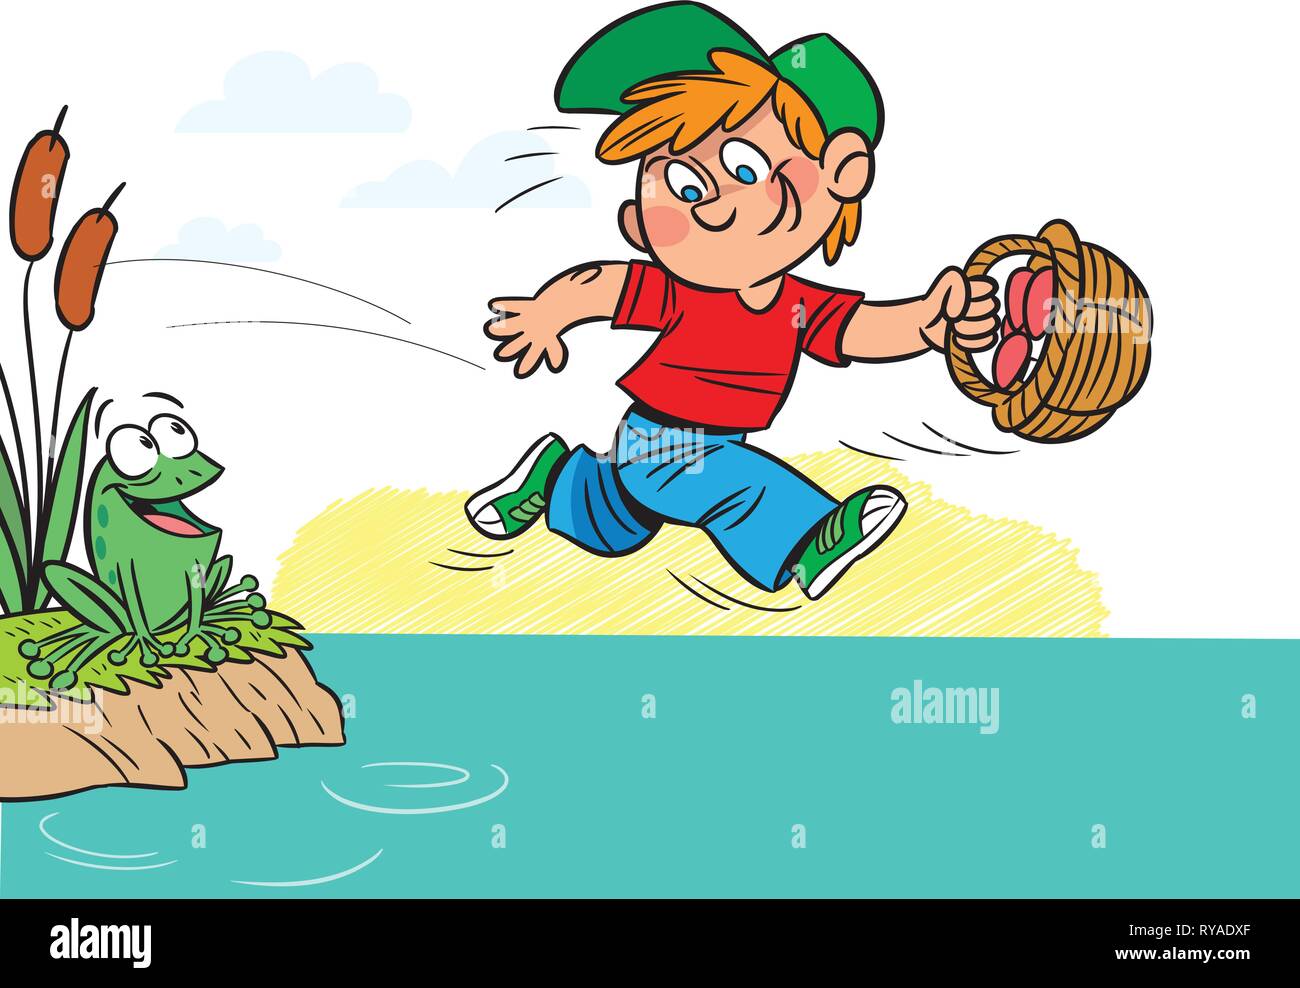 The illustration shows a funny boy with a basket of mushrooms in hands. He runs near the pond. Illustration done in cartoon style. Stock Vector